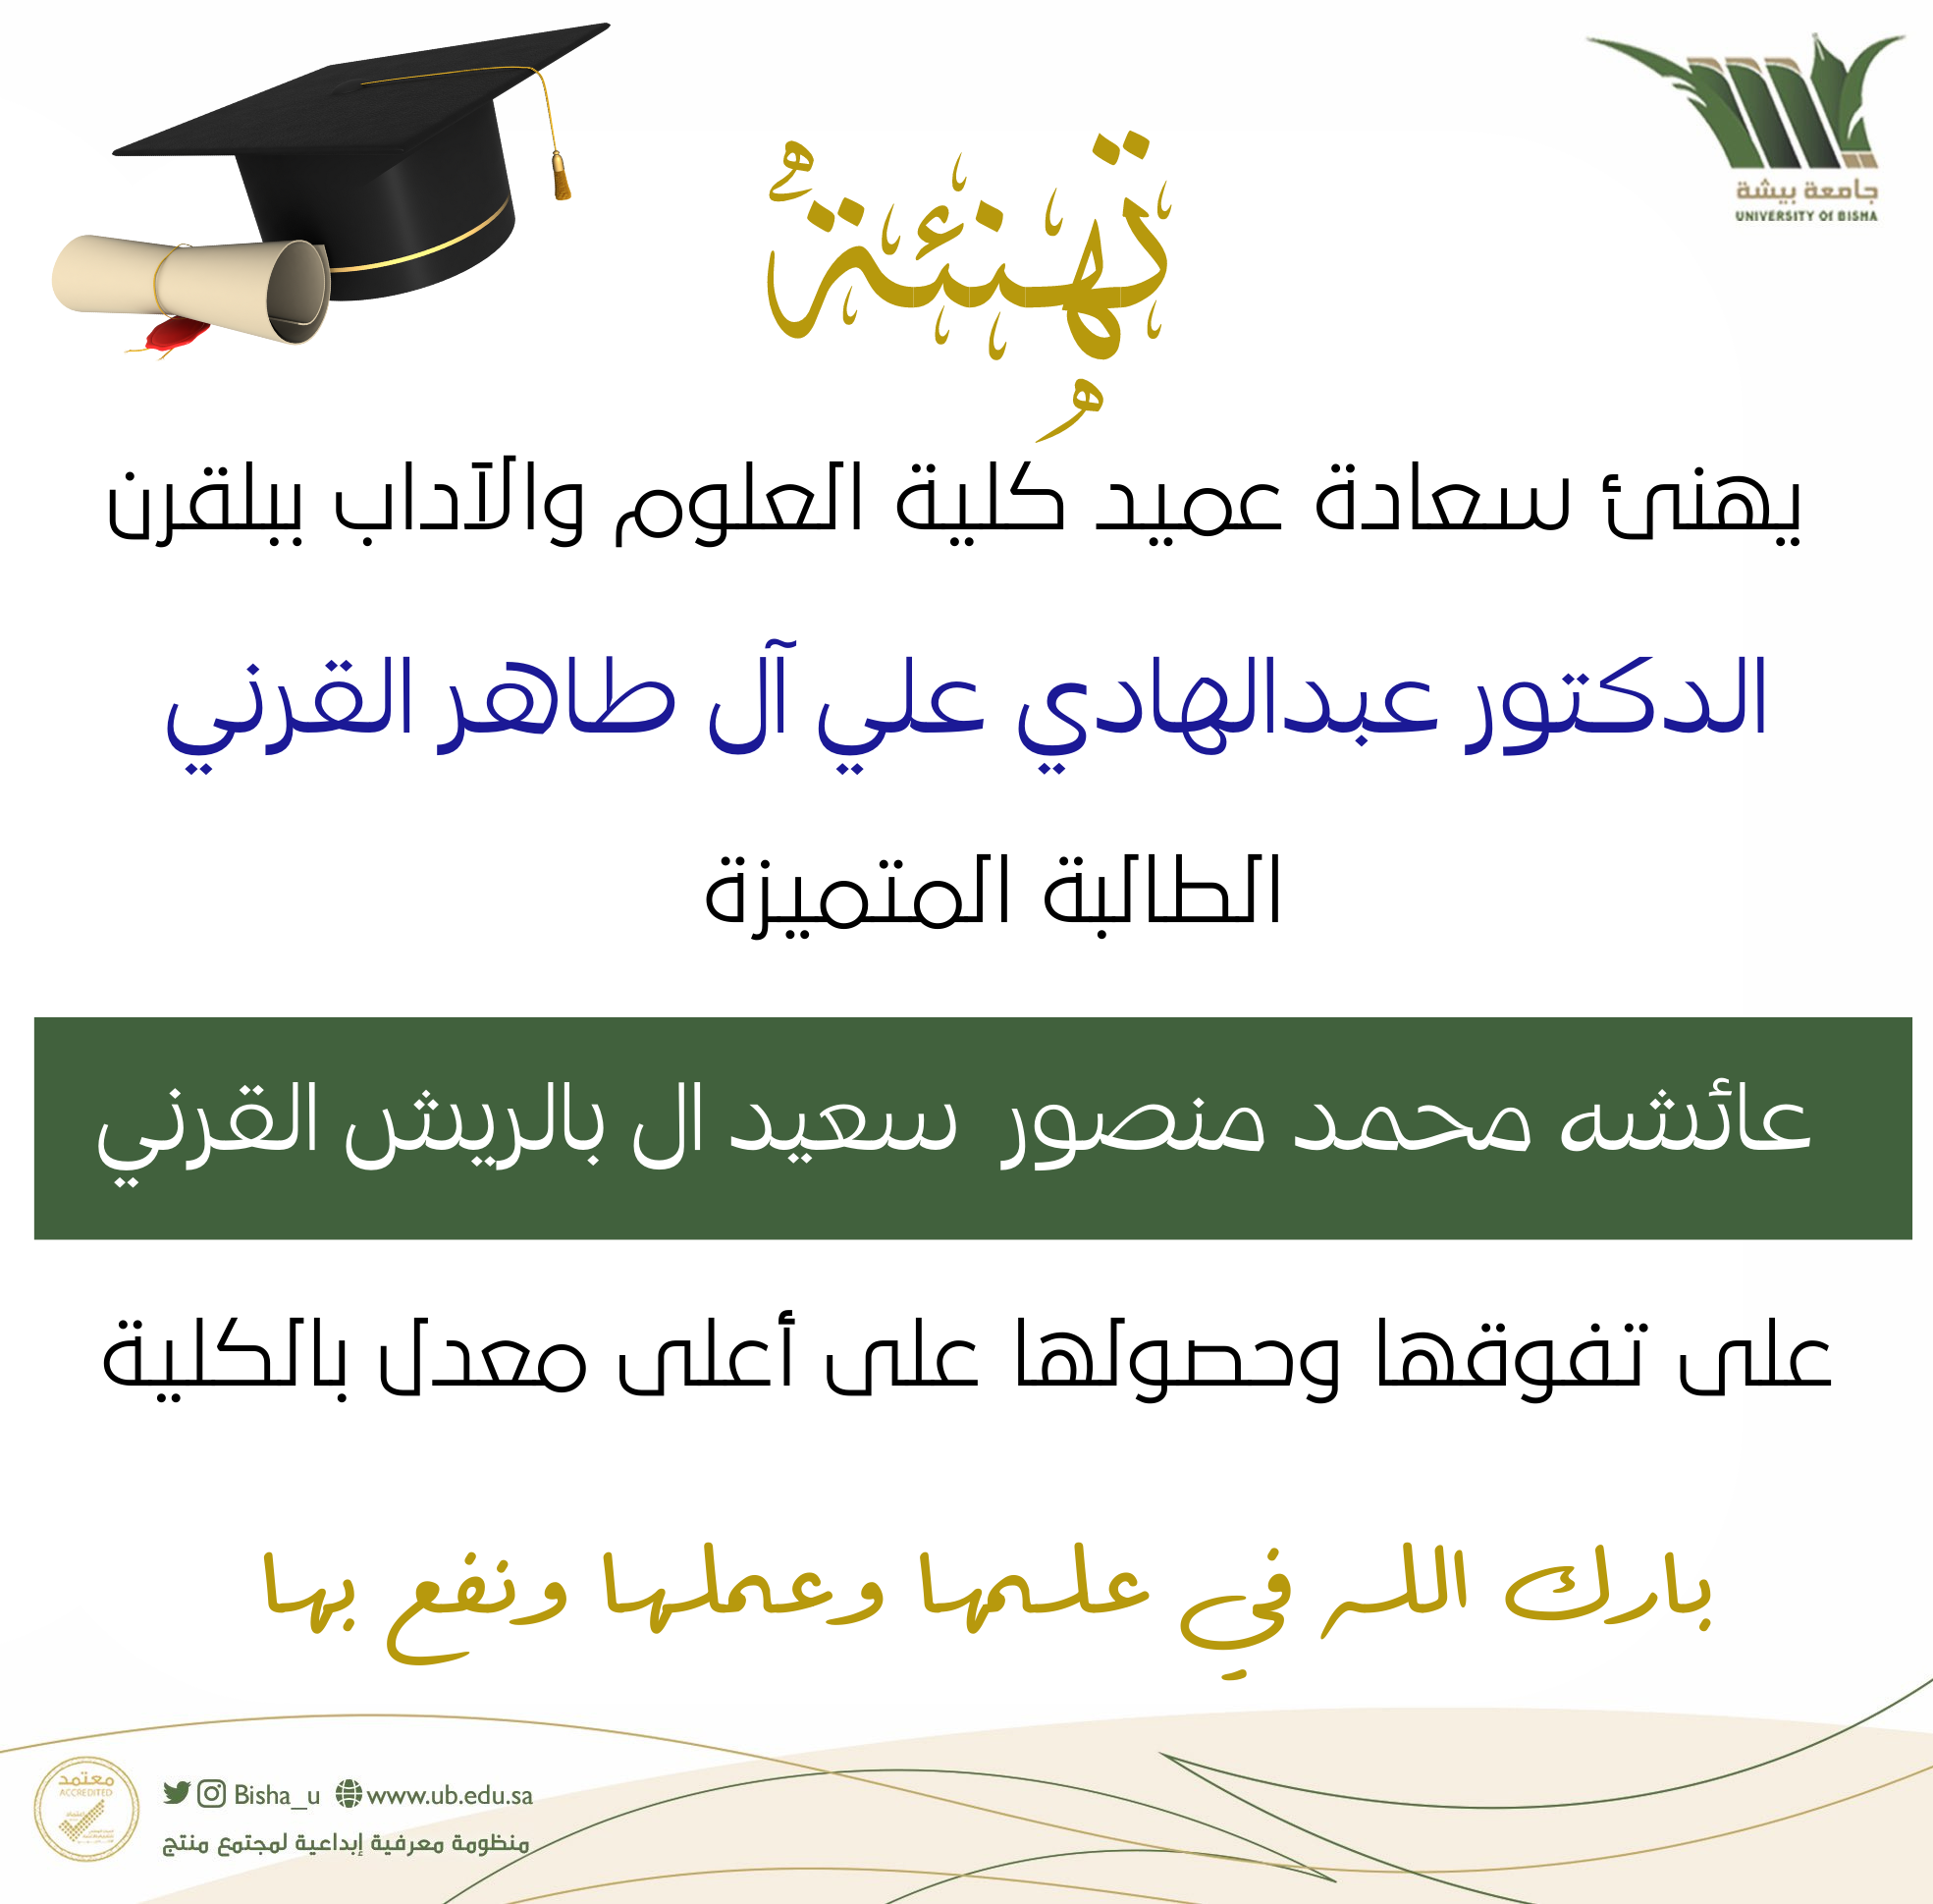 His Excellency the Dean of the College of Sciences and Arts in Balqarn congratulates the distinguished student Aisha Muhammad Mansour Saeed Al Balrich Al Qarni